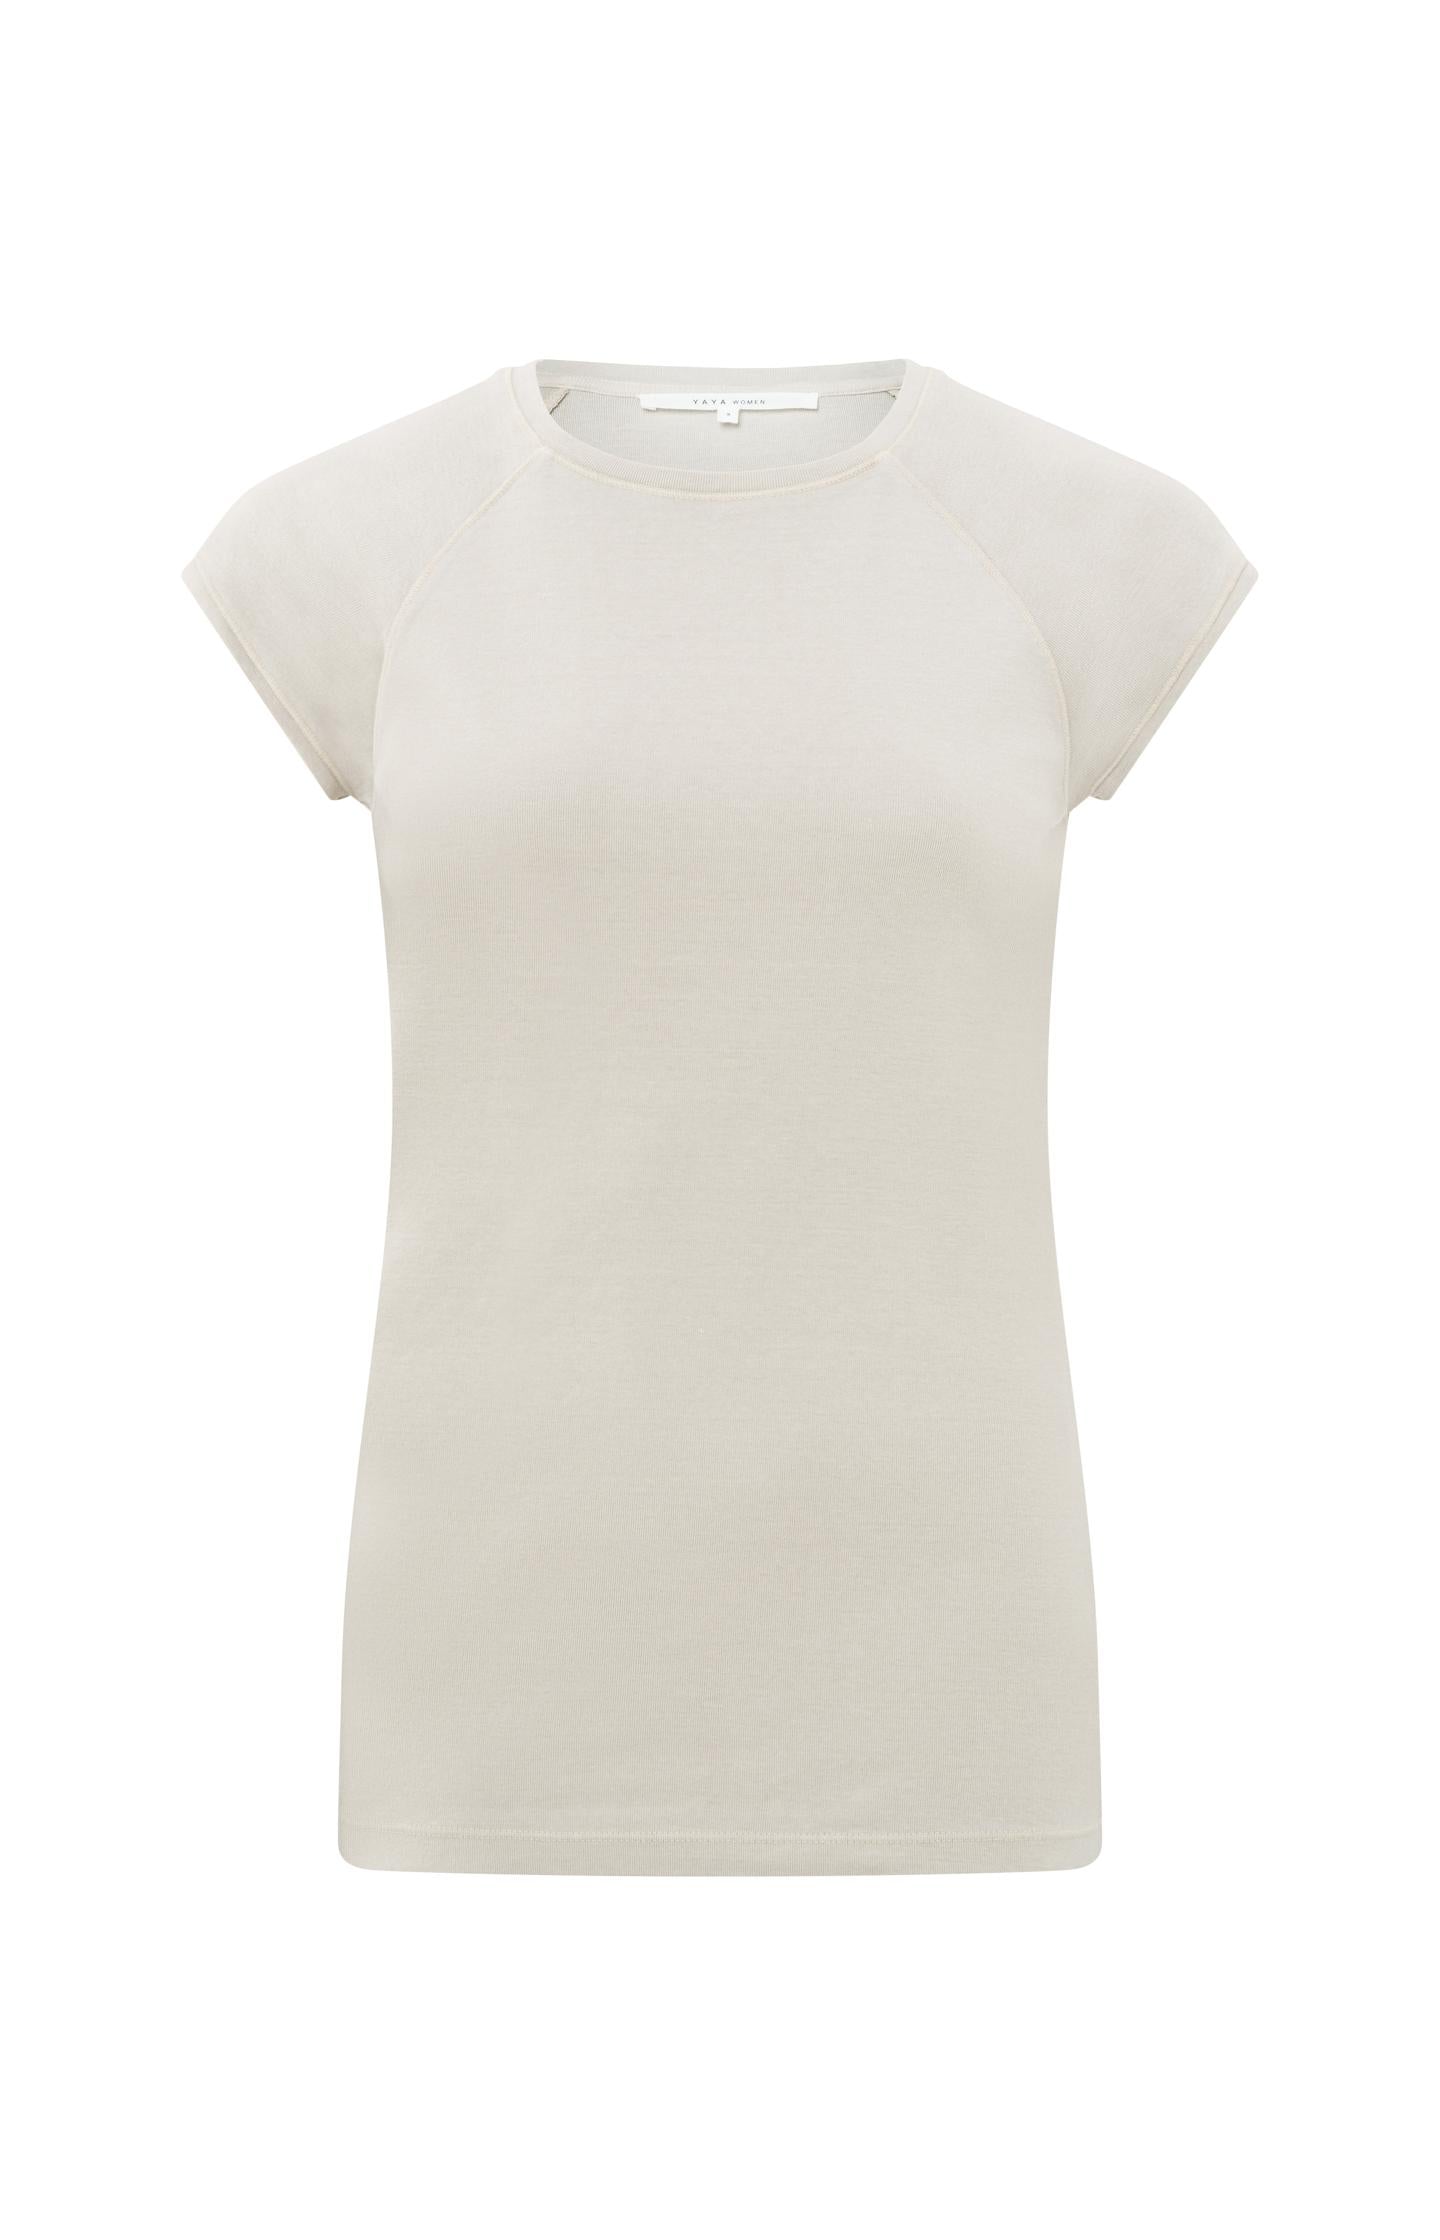 T-shirt with cap sleeves in a washed look - Type: product